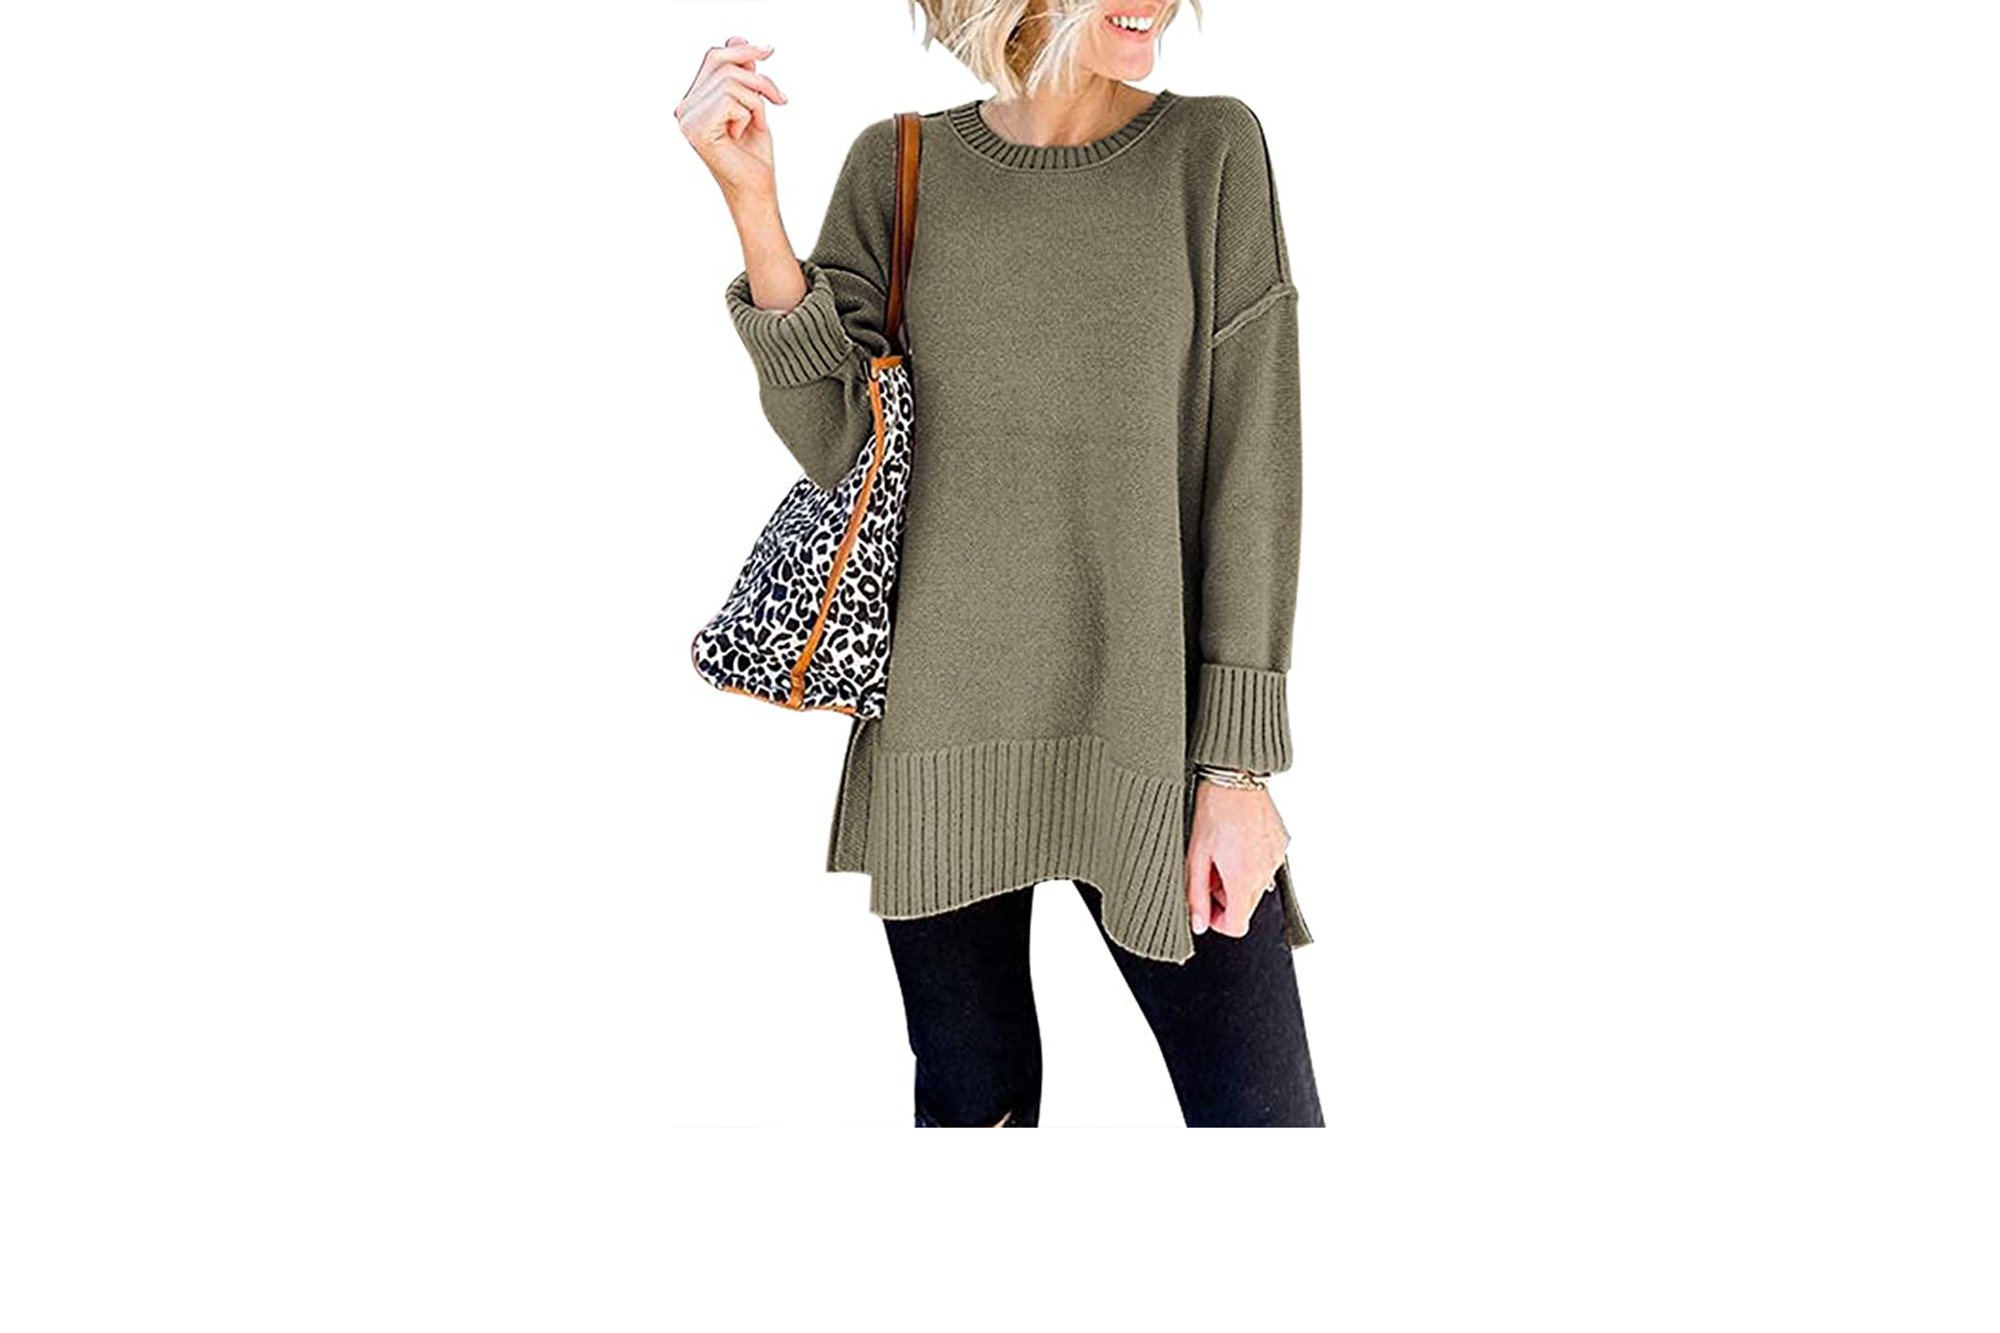 The perfect tunic sweater… just add leggings and boots! Now